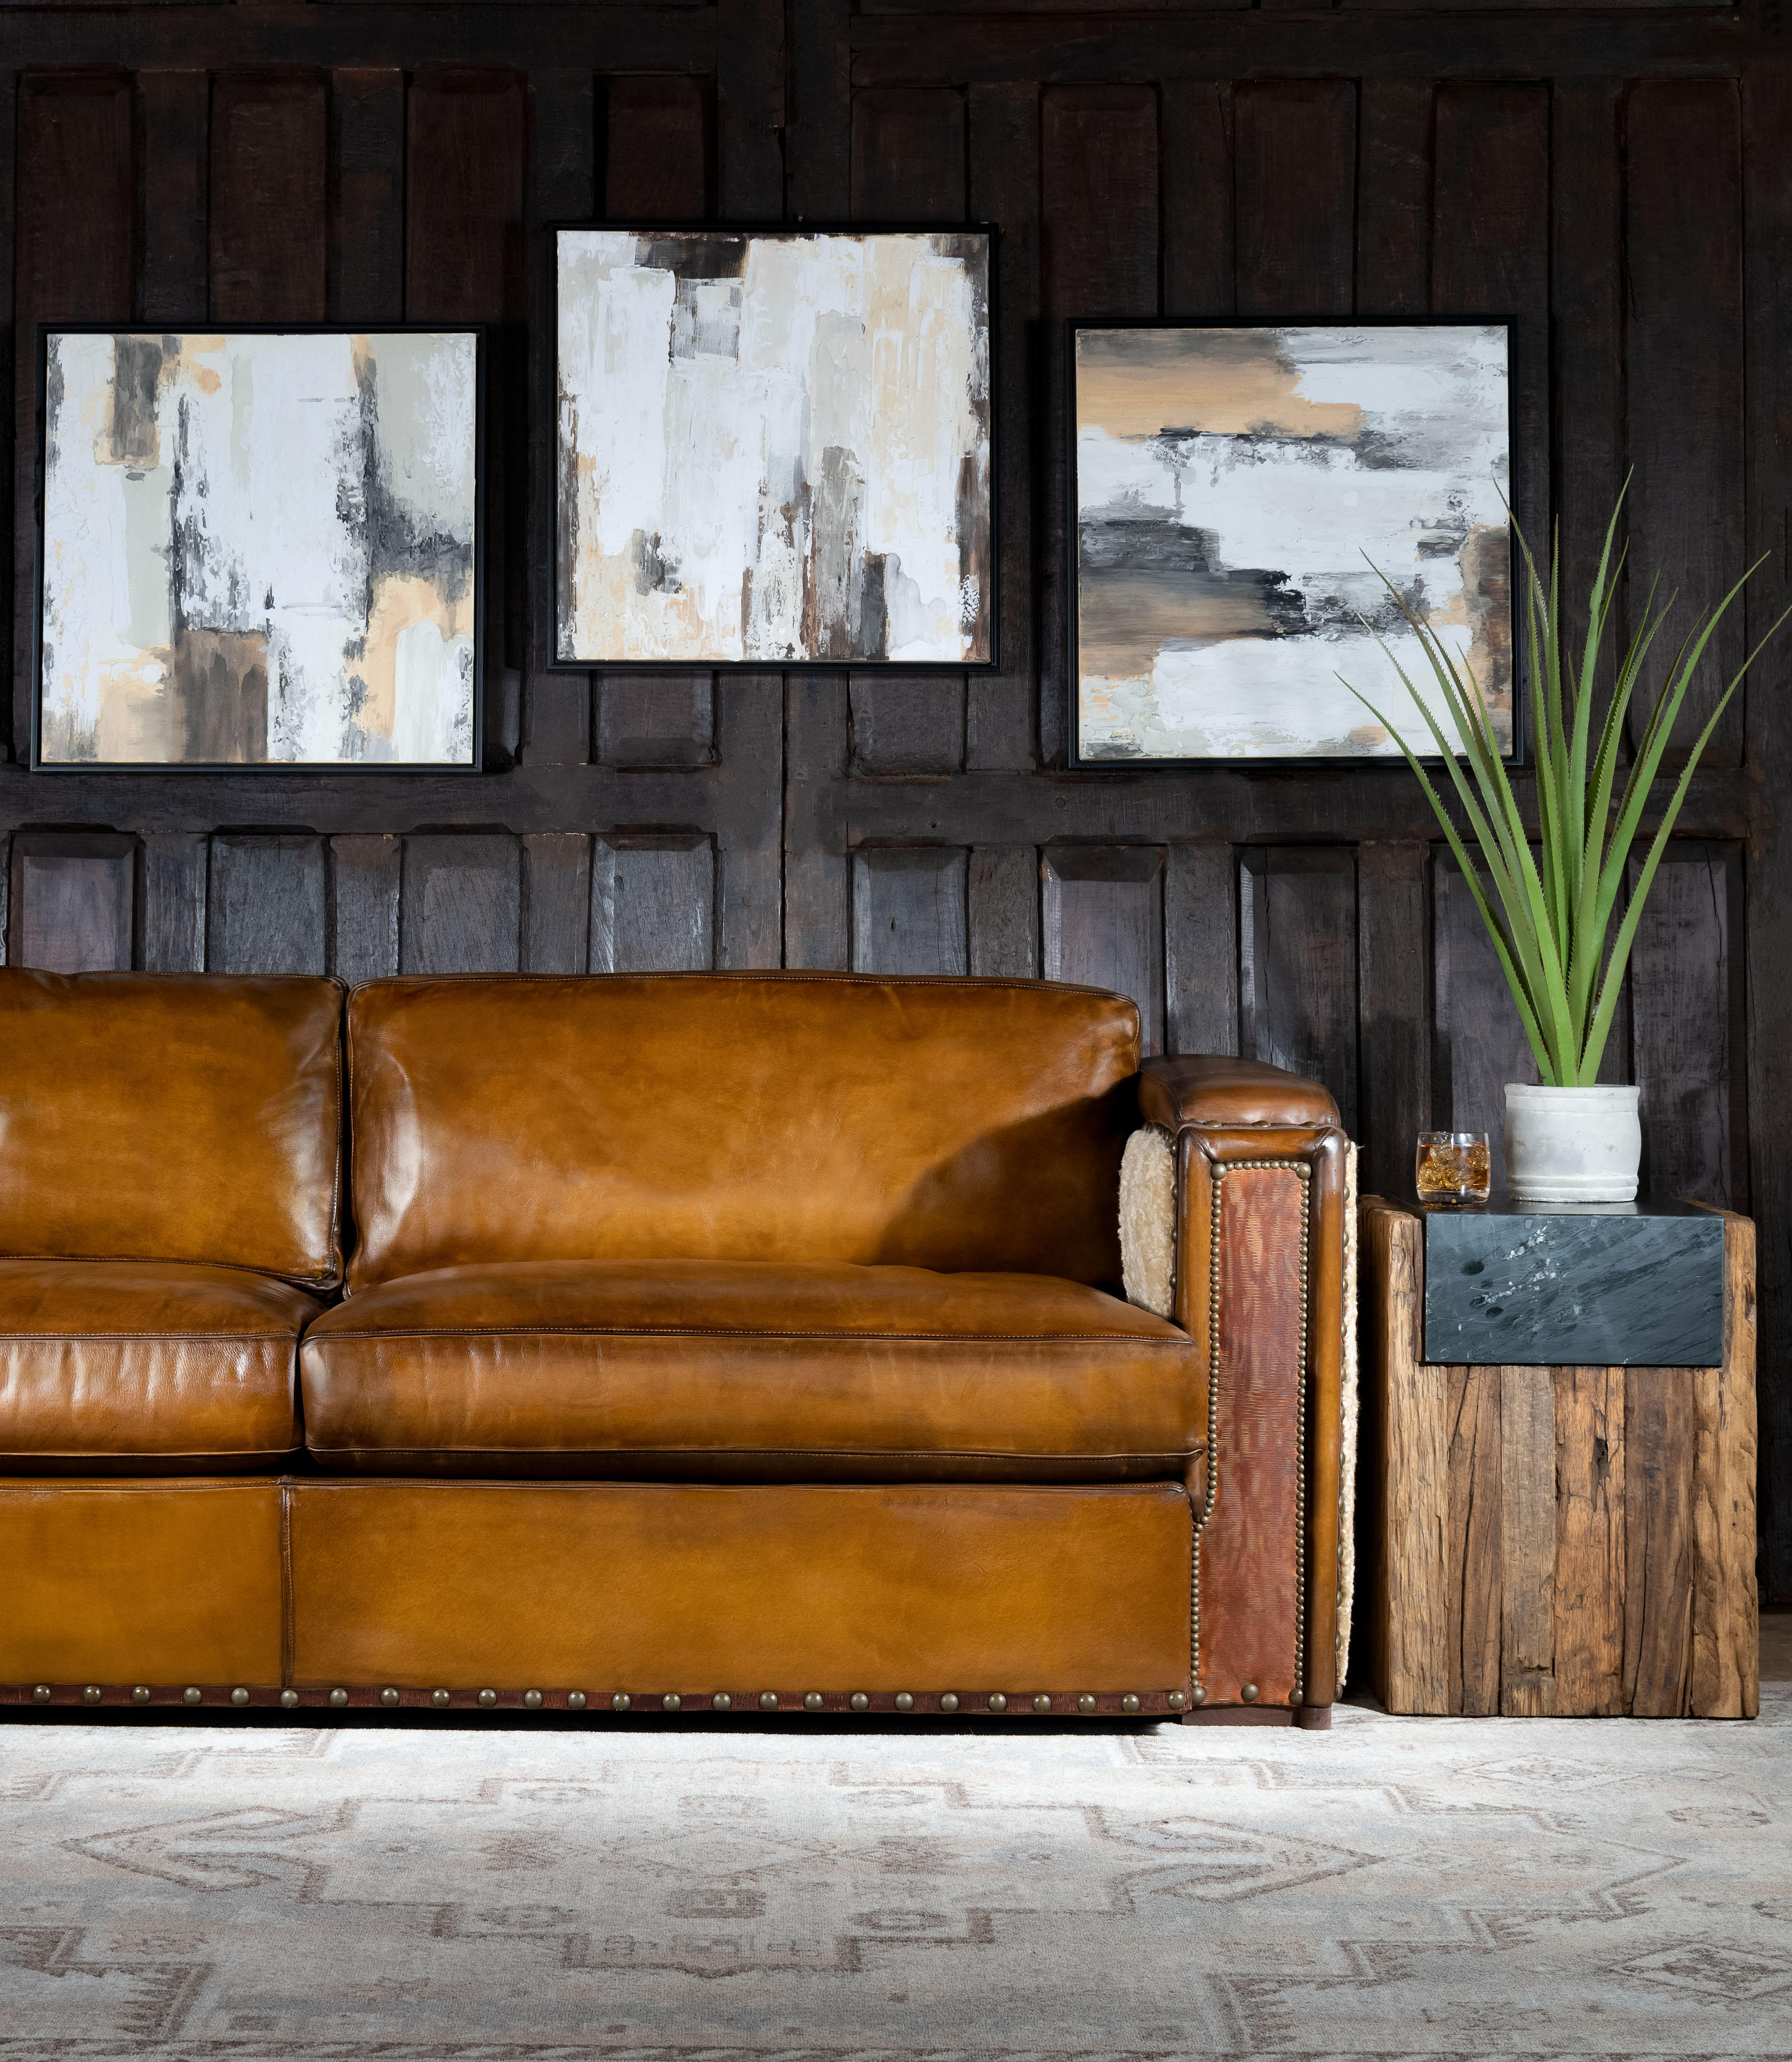 Our Cowboy Architect Sofa is modern rustic style with timeless comfort and quality. Featuring a hand burnished leather to achieve an aged patina in just the right places to reflect the aged qualities only time, wear, and frequent care could have accomplished naturally. The large boxy arms and studded genuine brass nail heads add that rustic feel while maintaining a modern design. The plush pillow back provides a sofa, sink in comfort that is great for relaxing. Premium Shearling hides wrap around the sides and back, accented with a thick leather belting. Black walnut is hand cut, sanded, and oiled rubbed for the finishing on the legs. The stylish looks and comfort of the Cowboy Architect Leather Sofa is top of the line inside and out! Constructed with a hardwood frame and topped off with a high density foam cushion ensures lasting comfort and durability. 100% American Made to the highest quality of standards and craftsmanship!